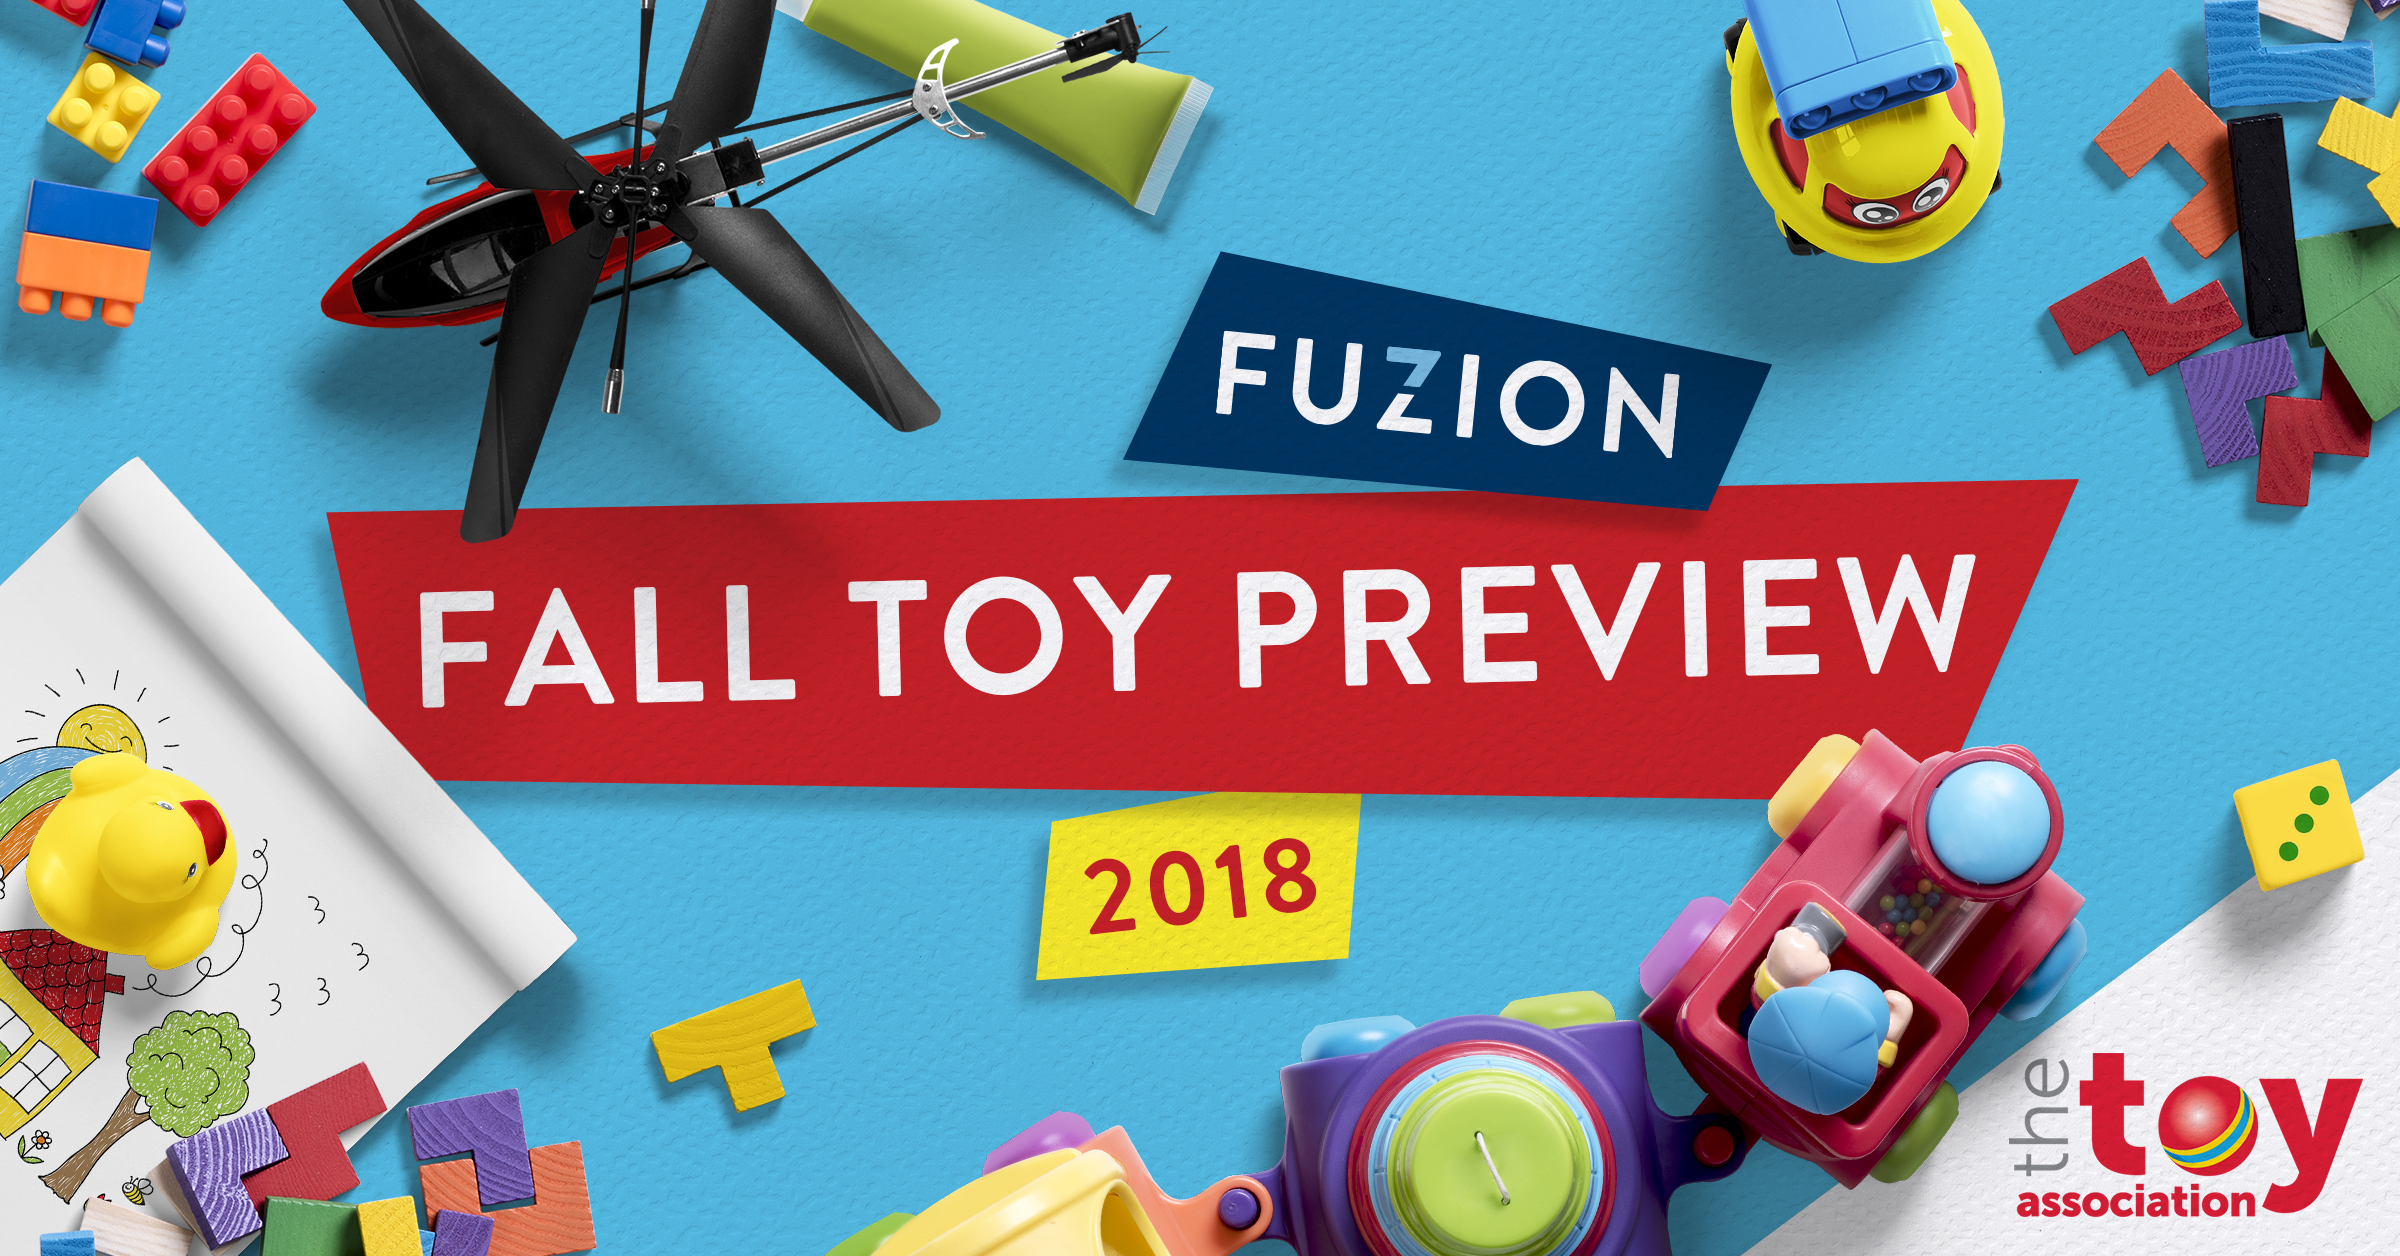 Meet Us at Fall Toy Preview! Fuzion